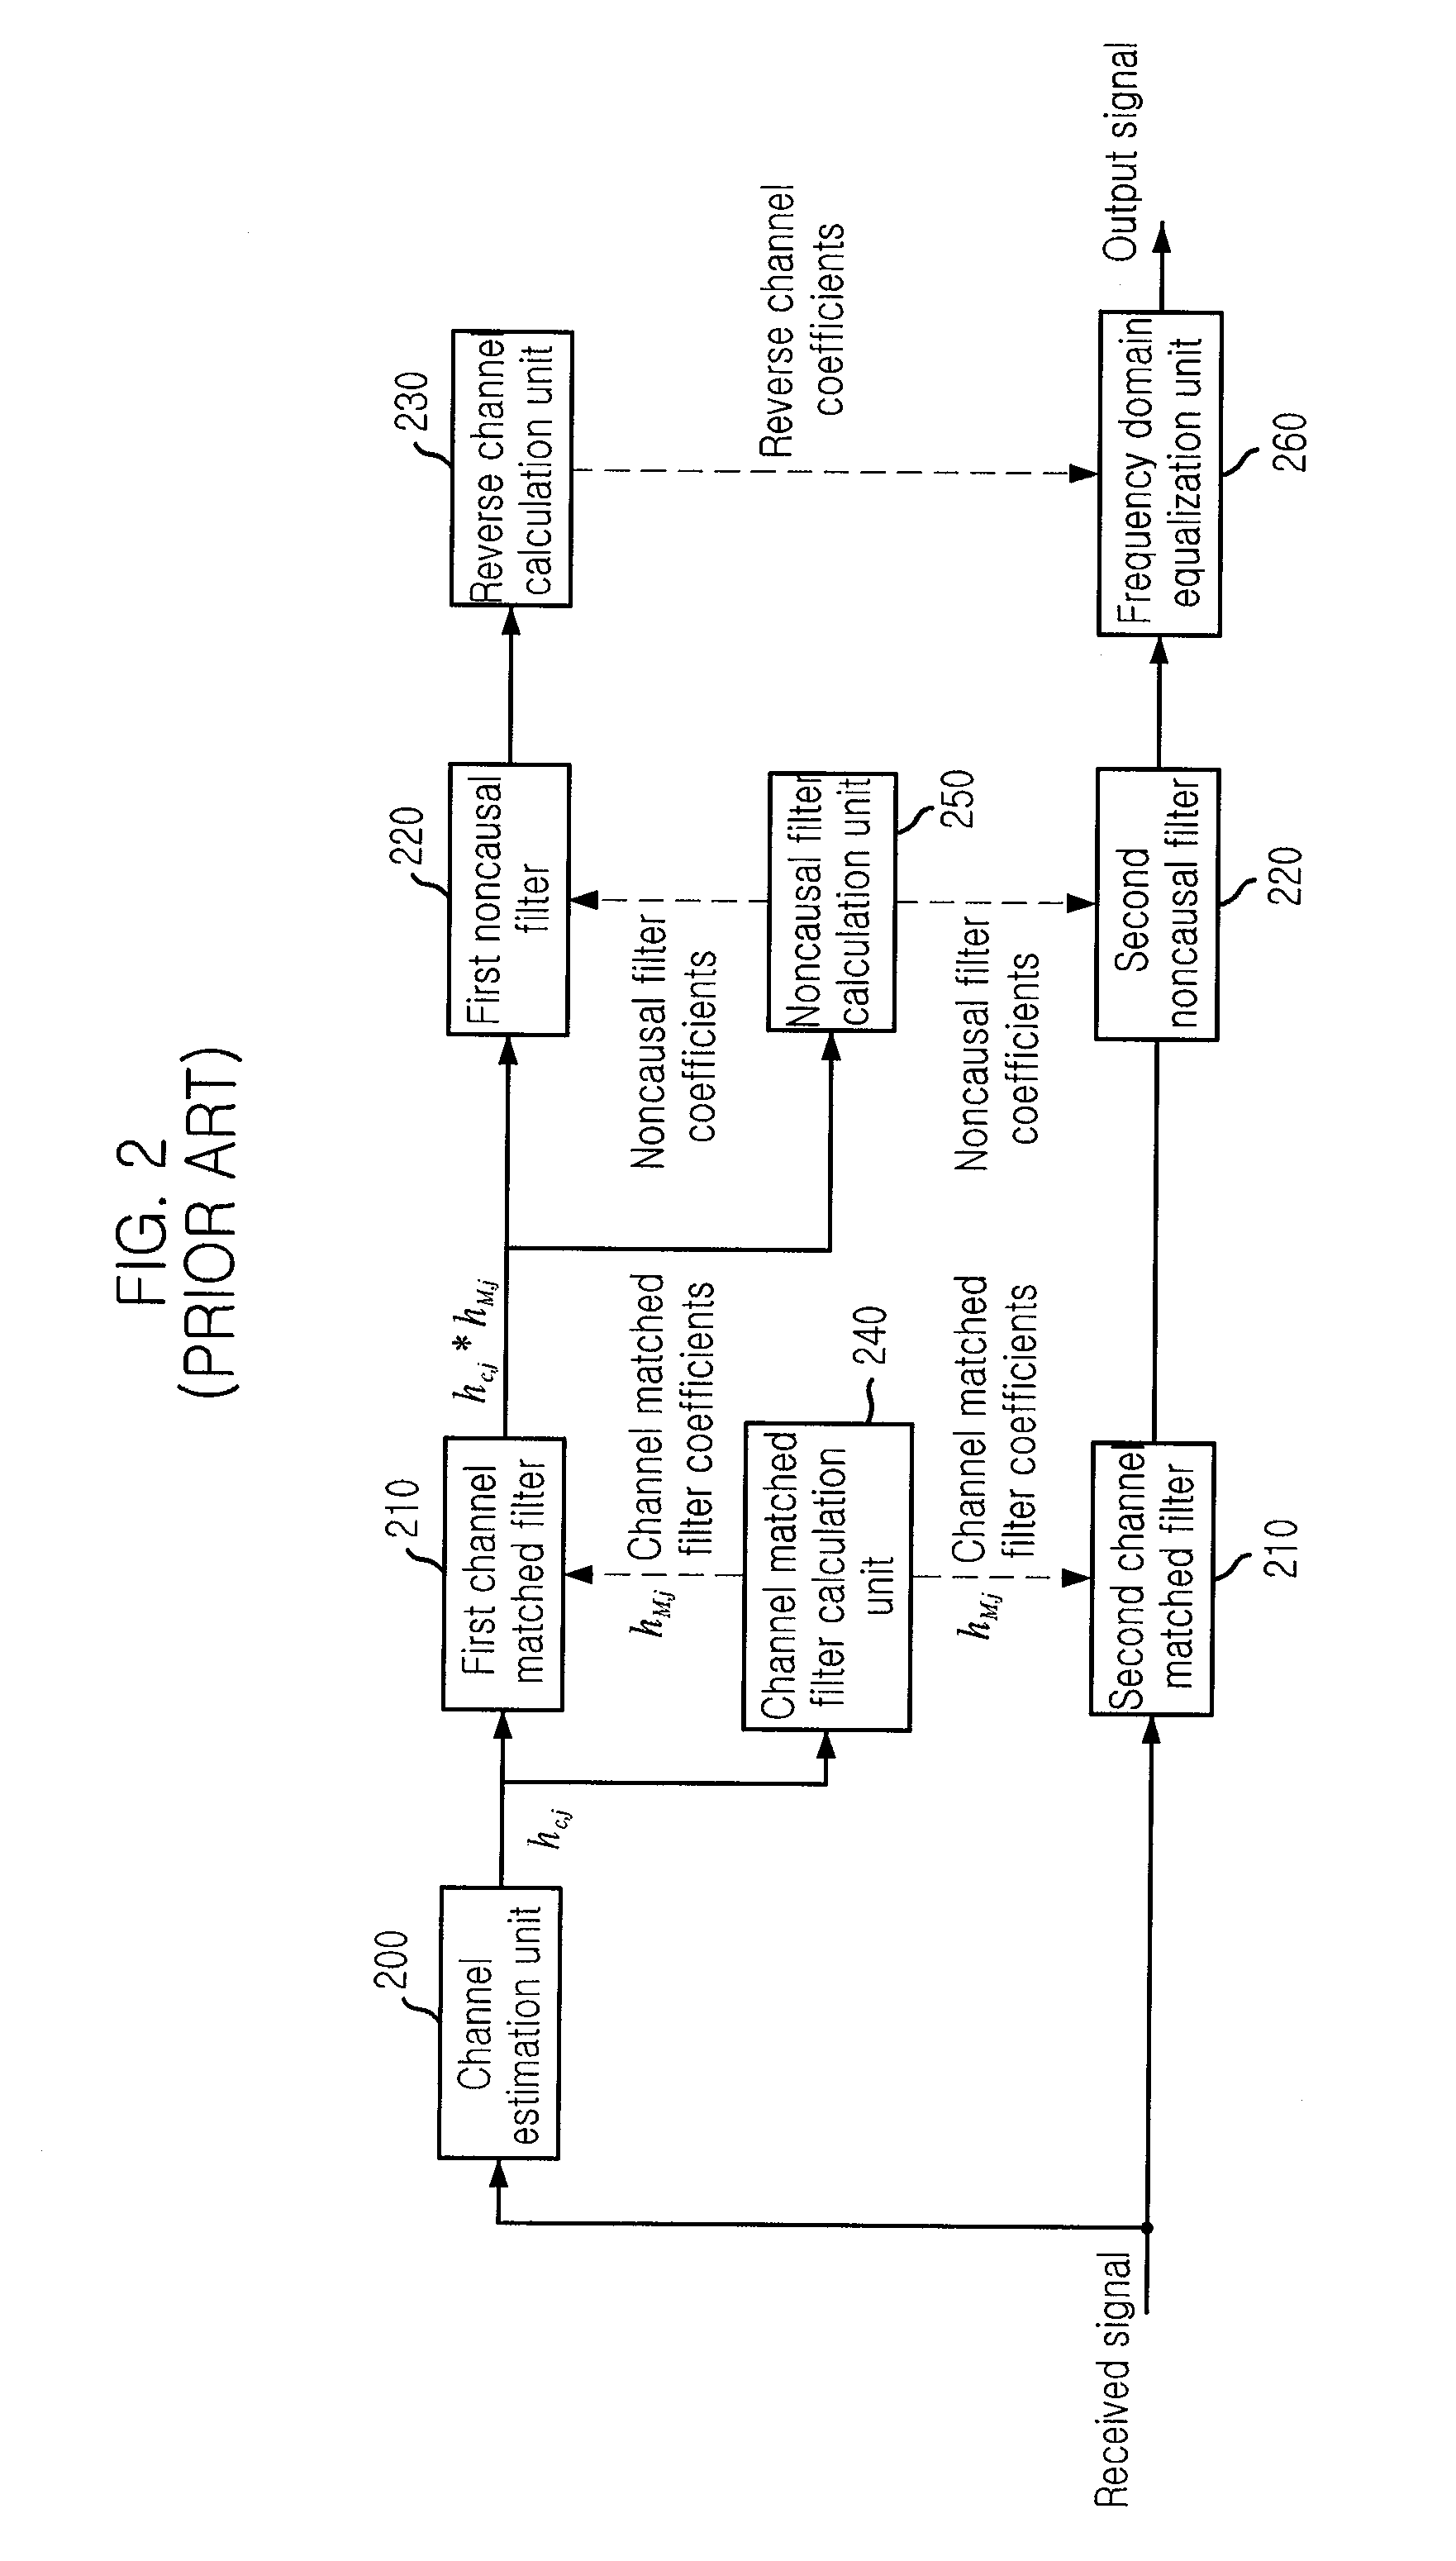 Apparatus for equalizing channel in frequency domain and method therefor